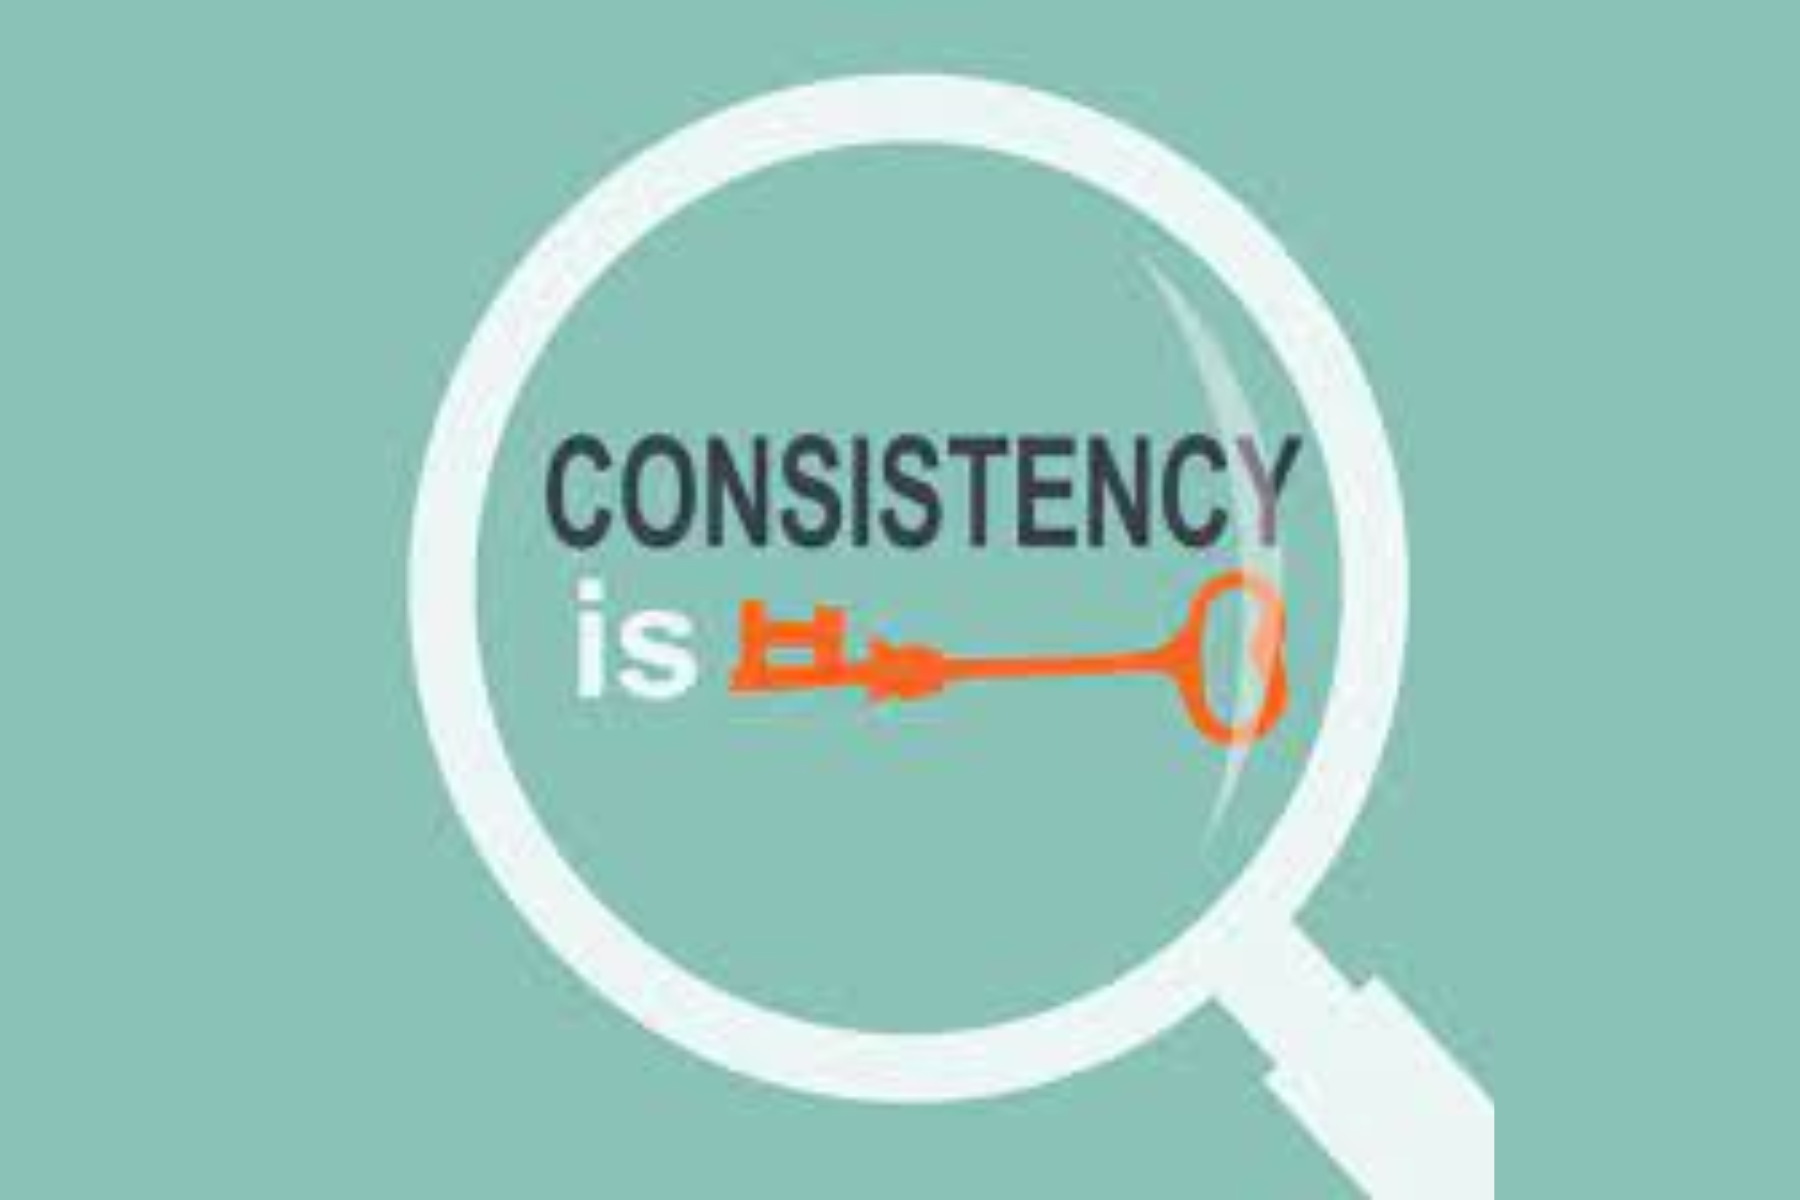 A magnifying in front of the words "Consistent is *key*"